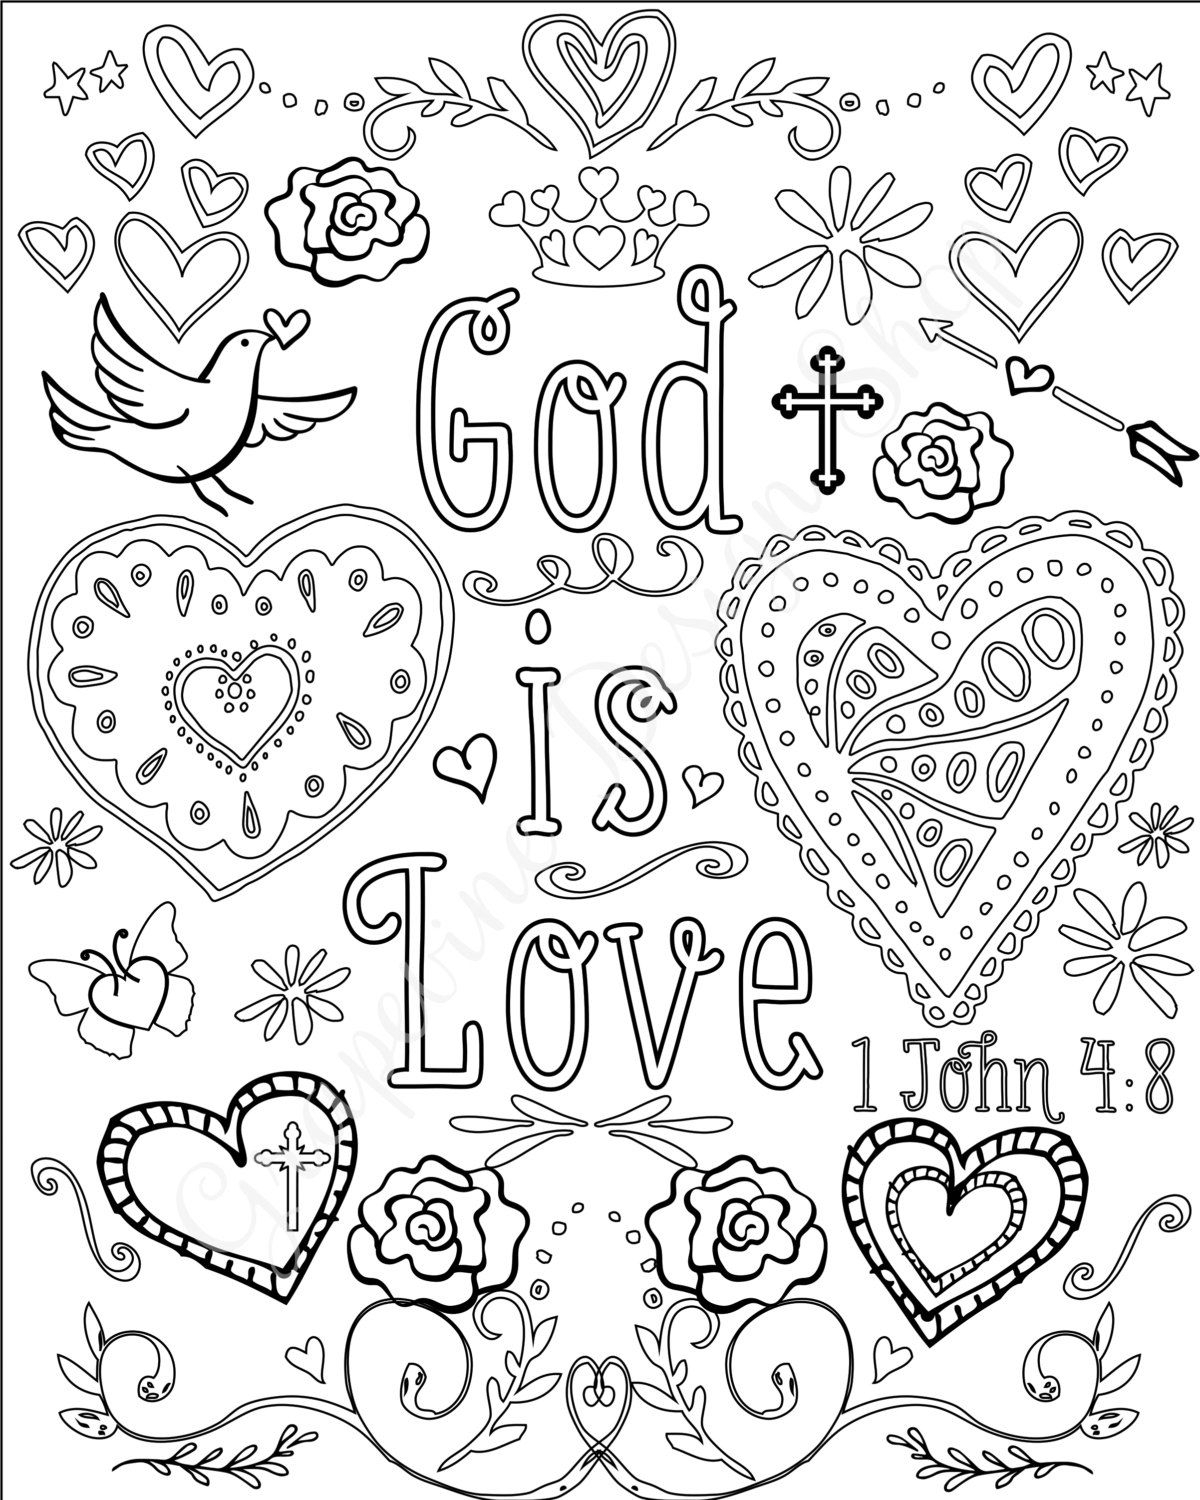 Bible Verse Coloring Pages For Adults at GetColorings.com | Free